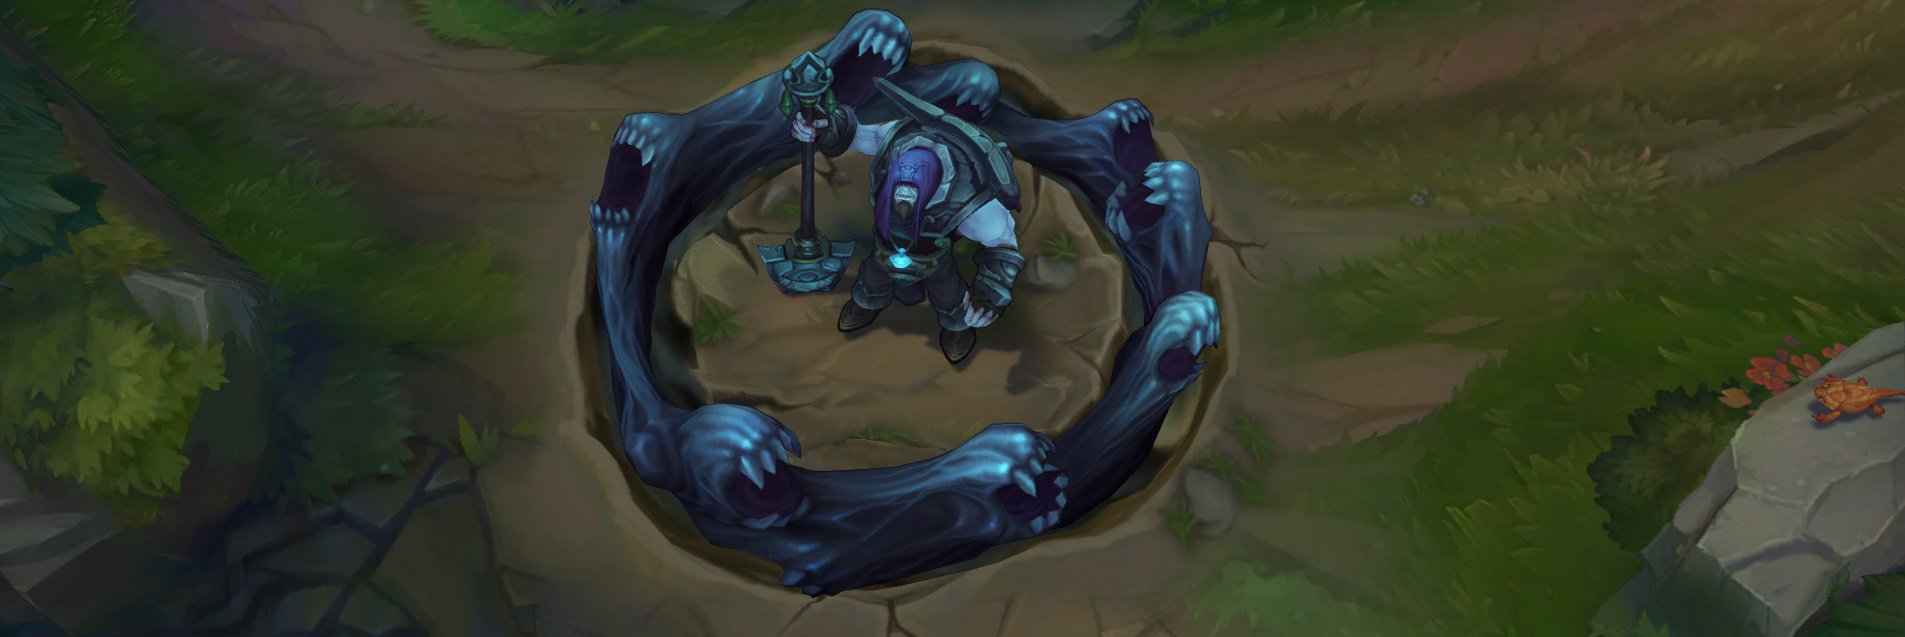 Moobeat 8 23 Pbe Yorick Champion Update Championship Zed Four New Cooking Skins More T Co Fy0lxuw0ql